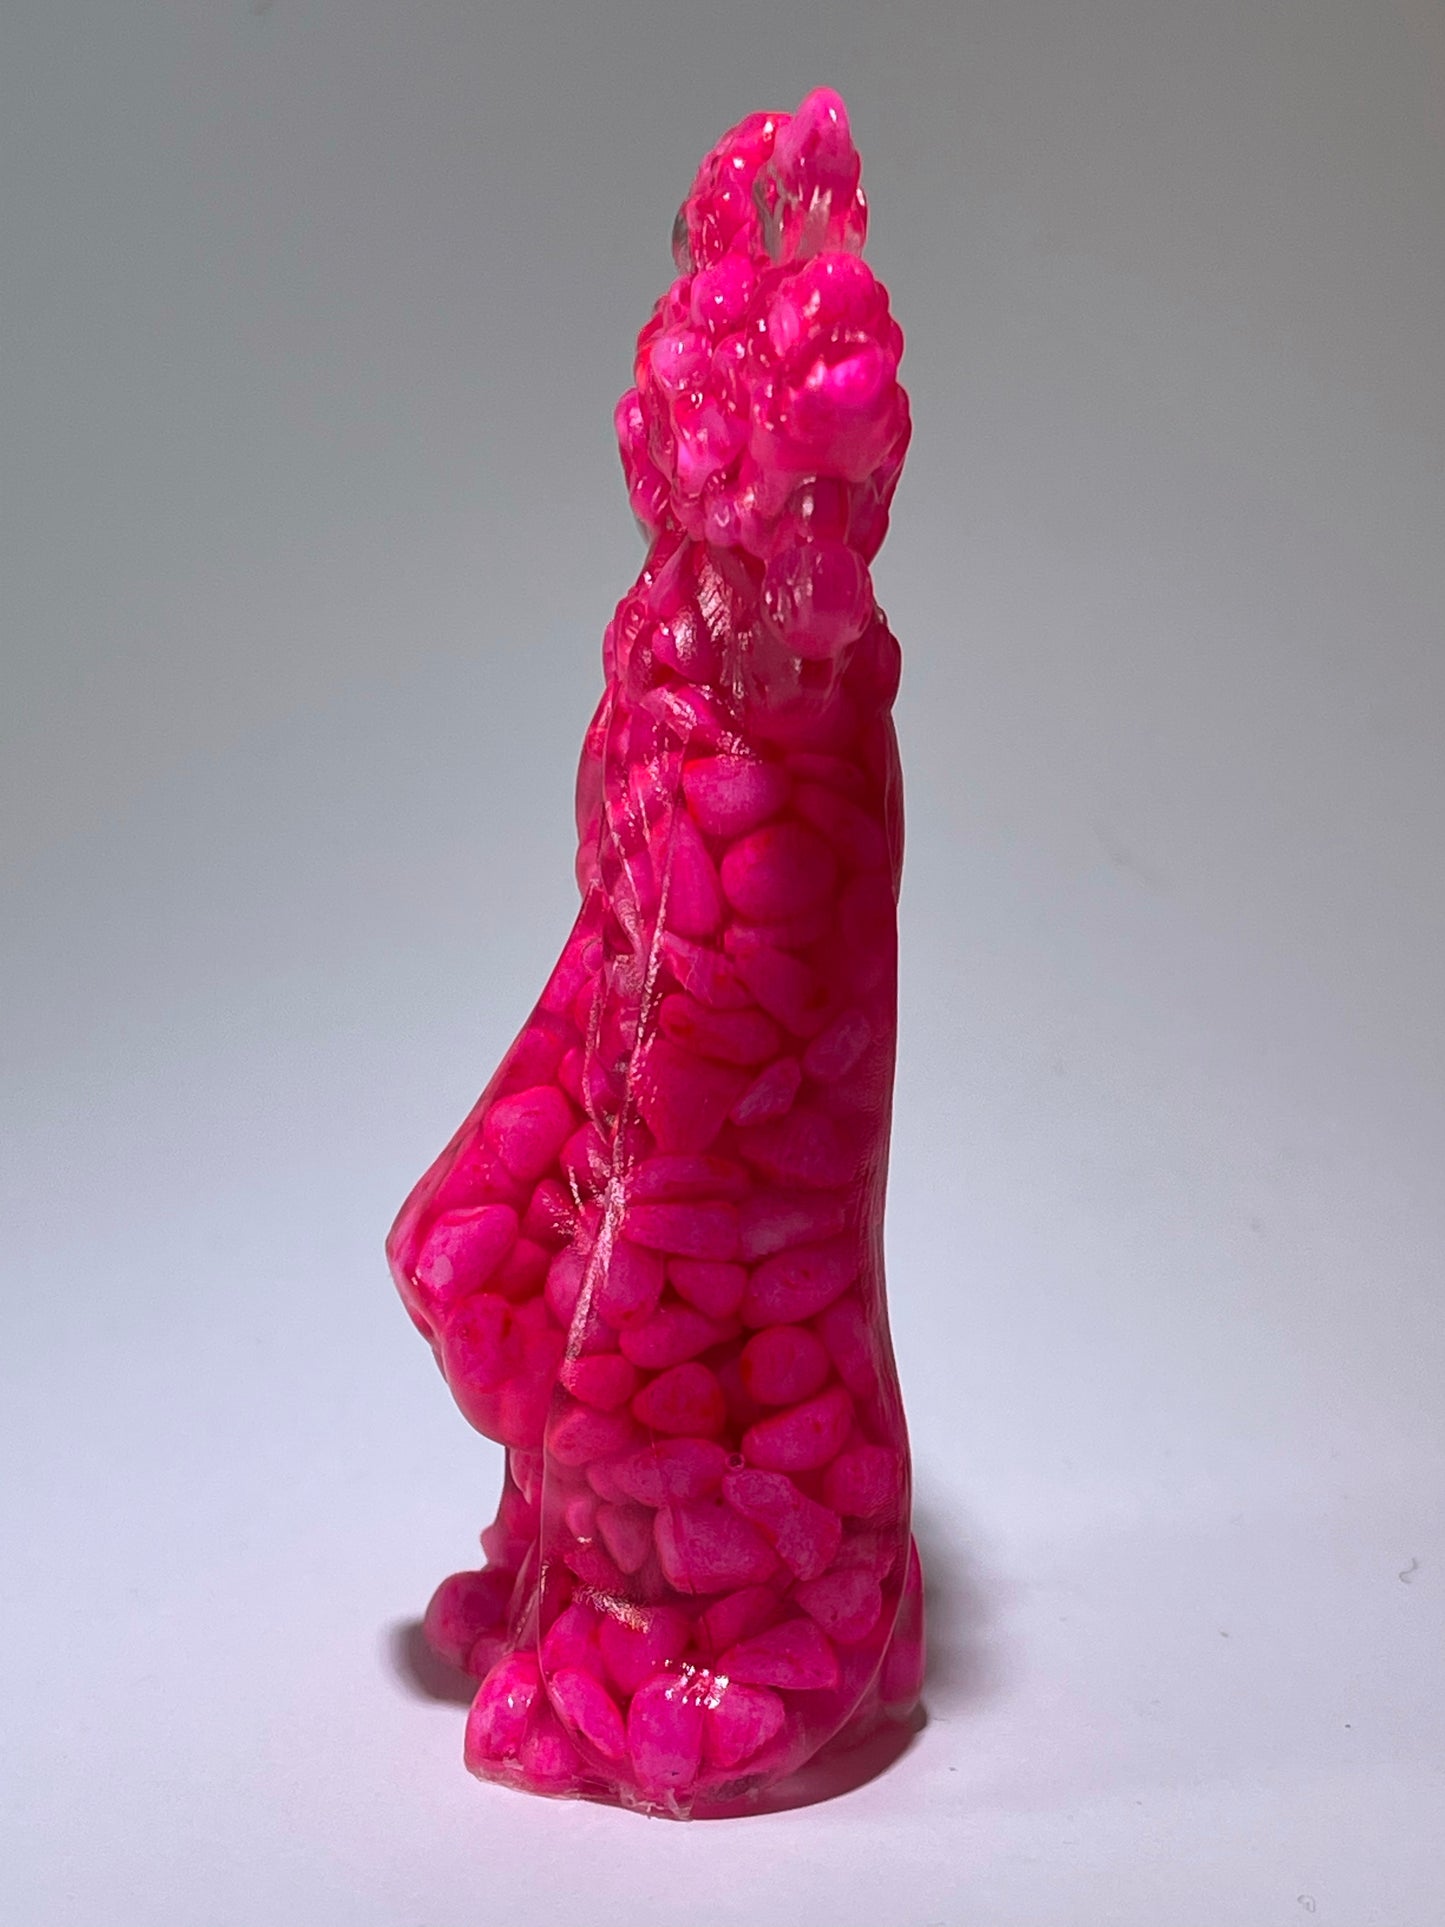 His Majesty, the King: Resin Cast with Pink Stones